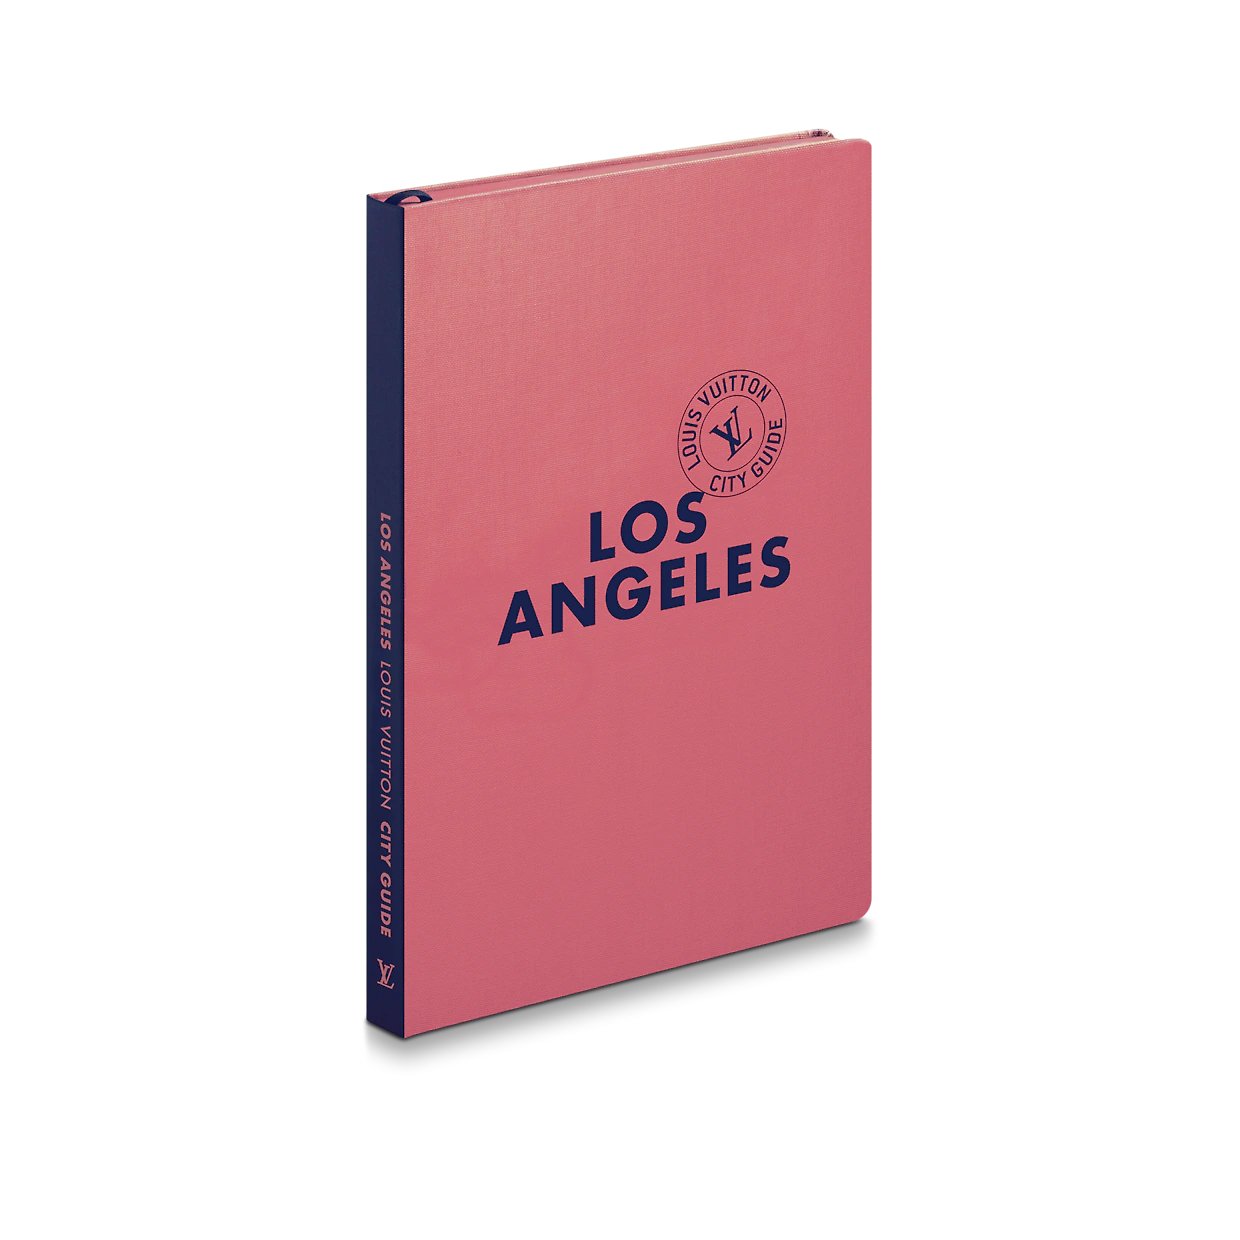 DreamBrotherGallery.com is featured in the 2021 Louis Vuitton Los Angeles City Guide Book.&nbsp;